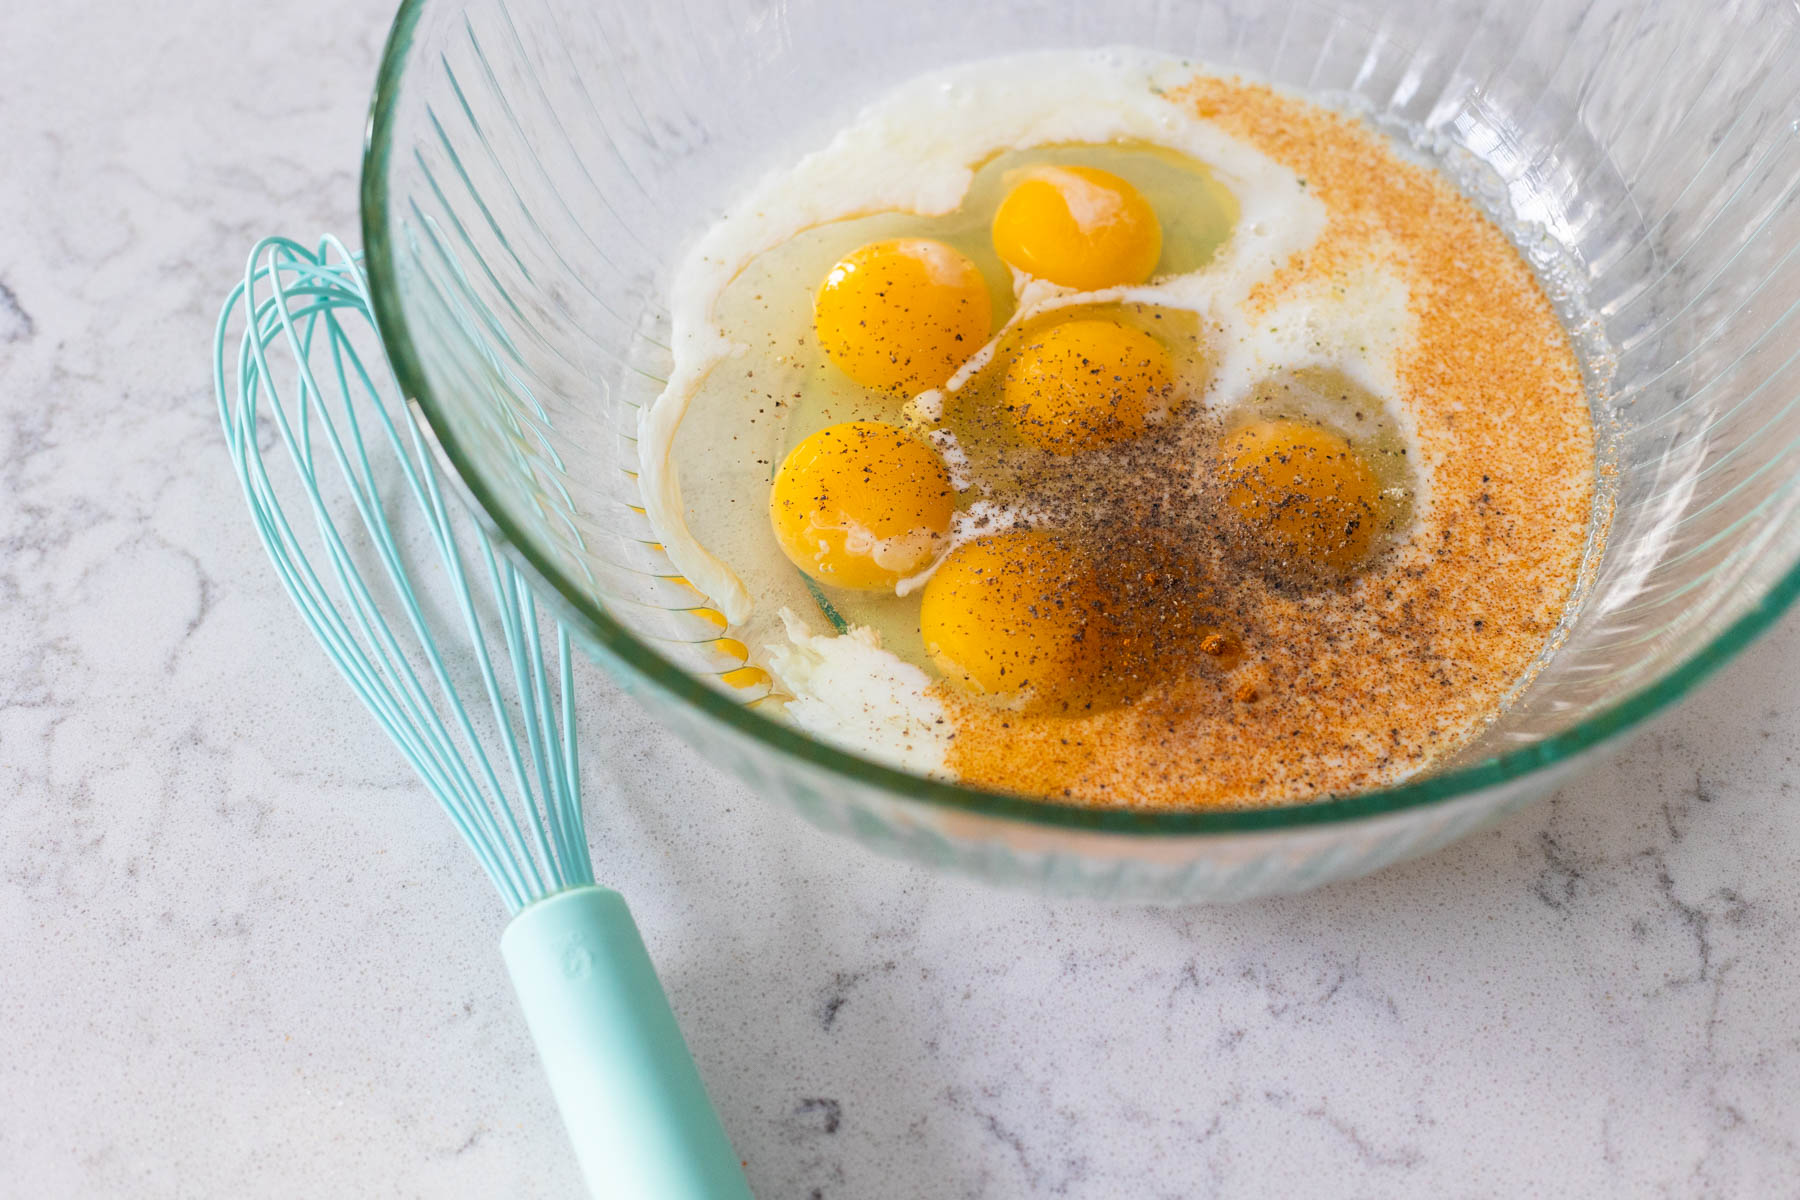 The eggs have been added to a mixing bowl with milk and seasonings.